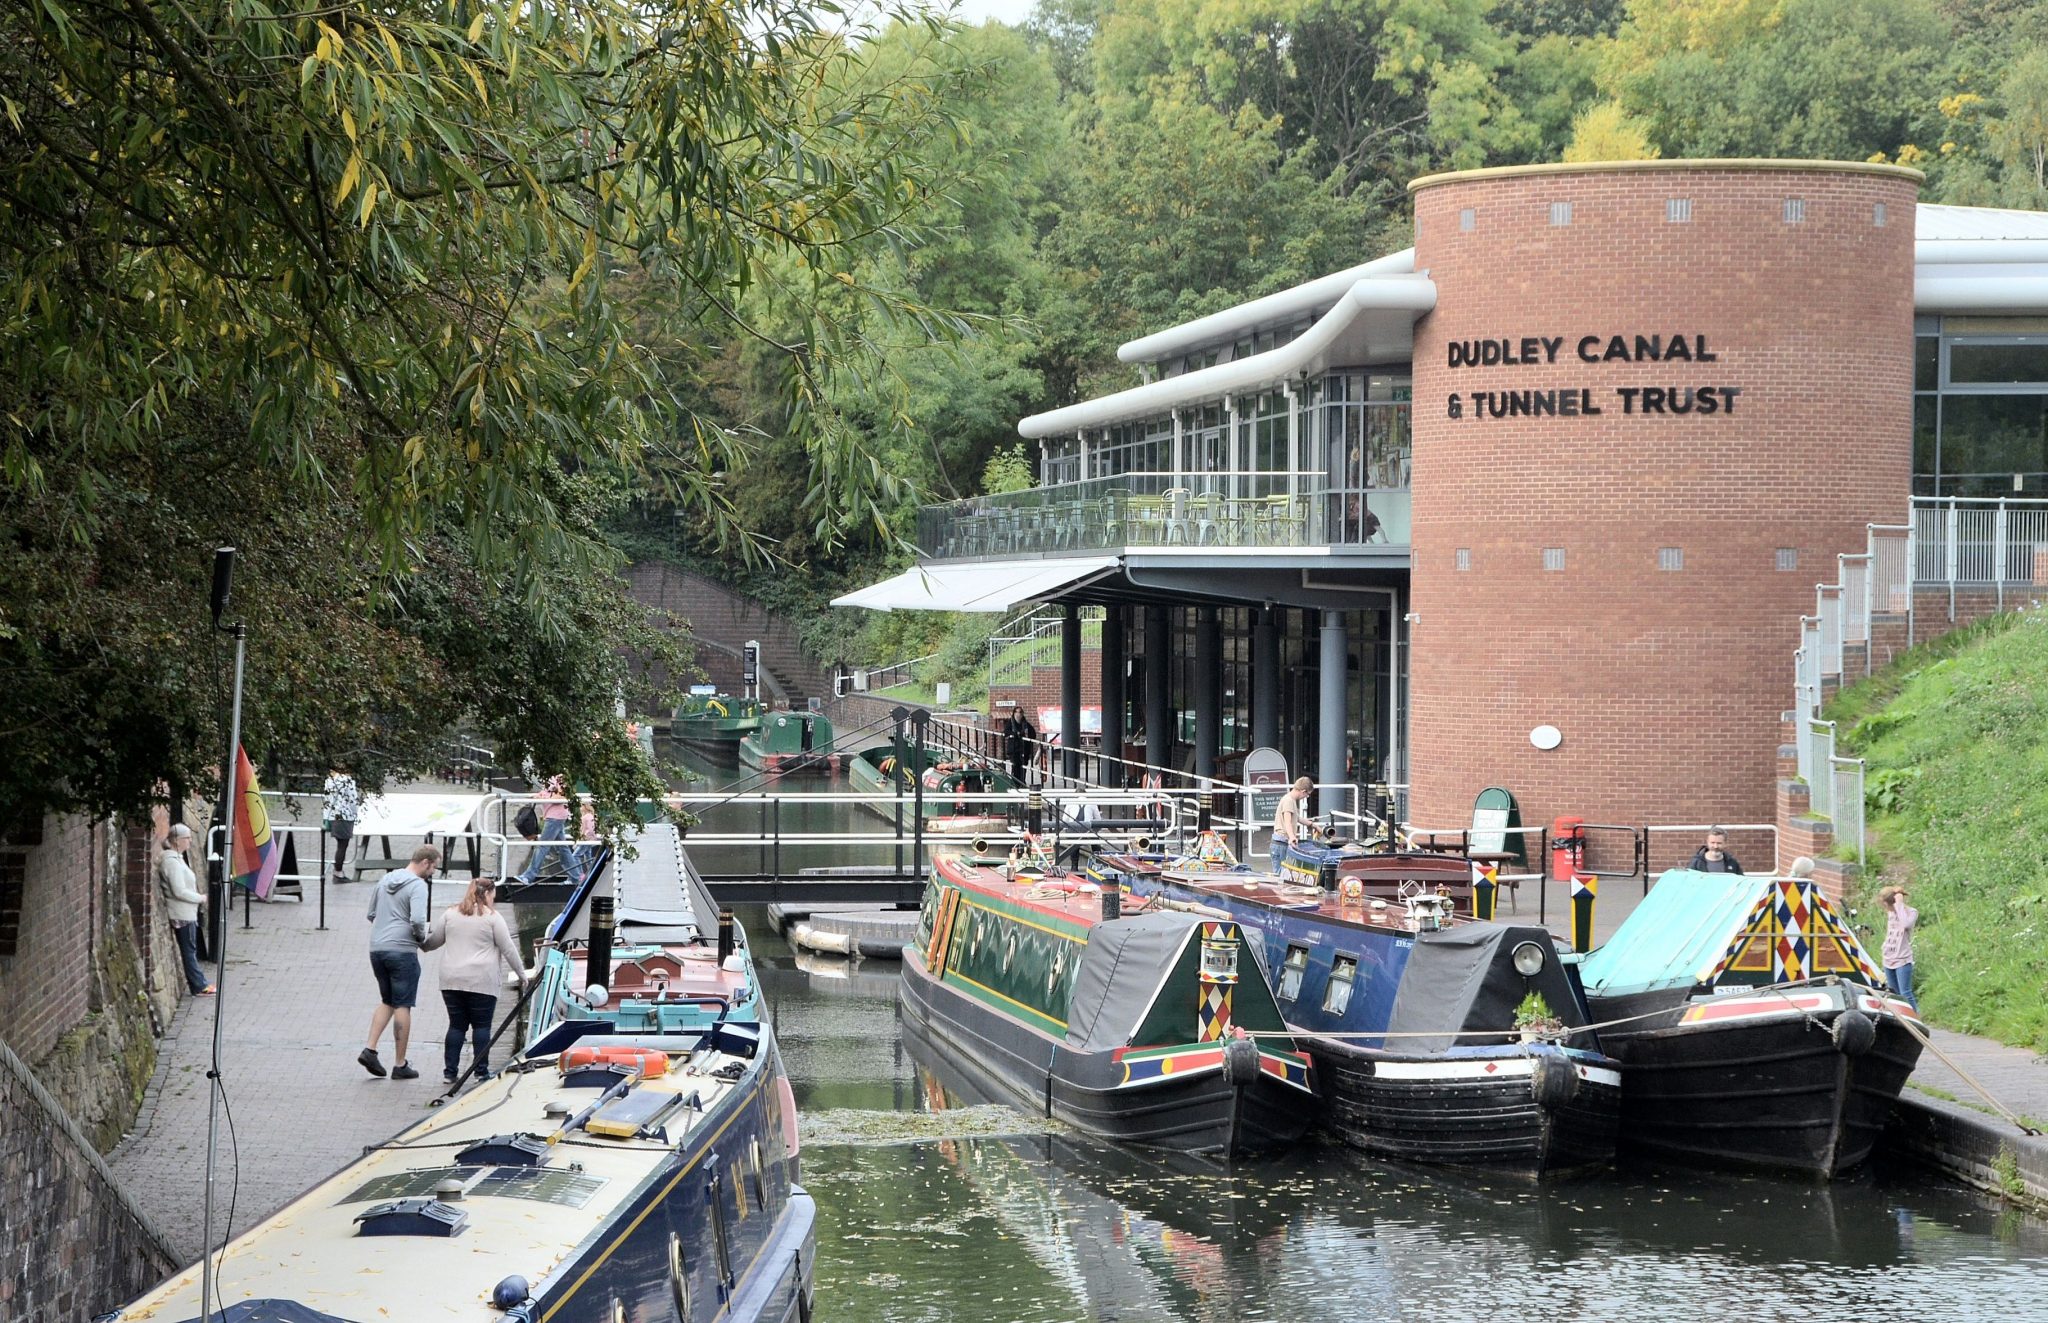 Dudley Canal and Tunnel Trust